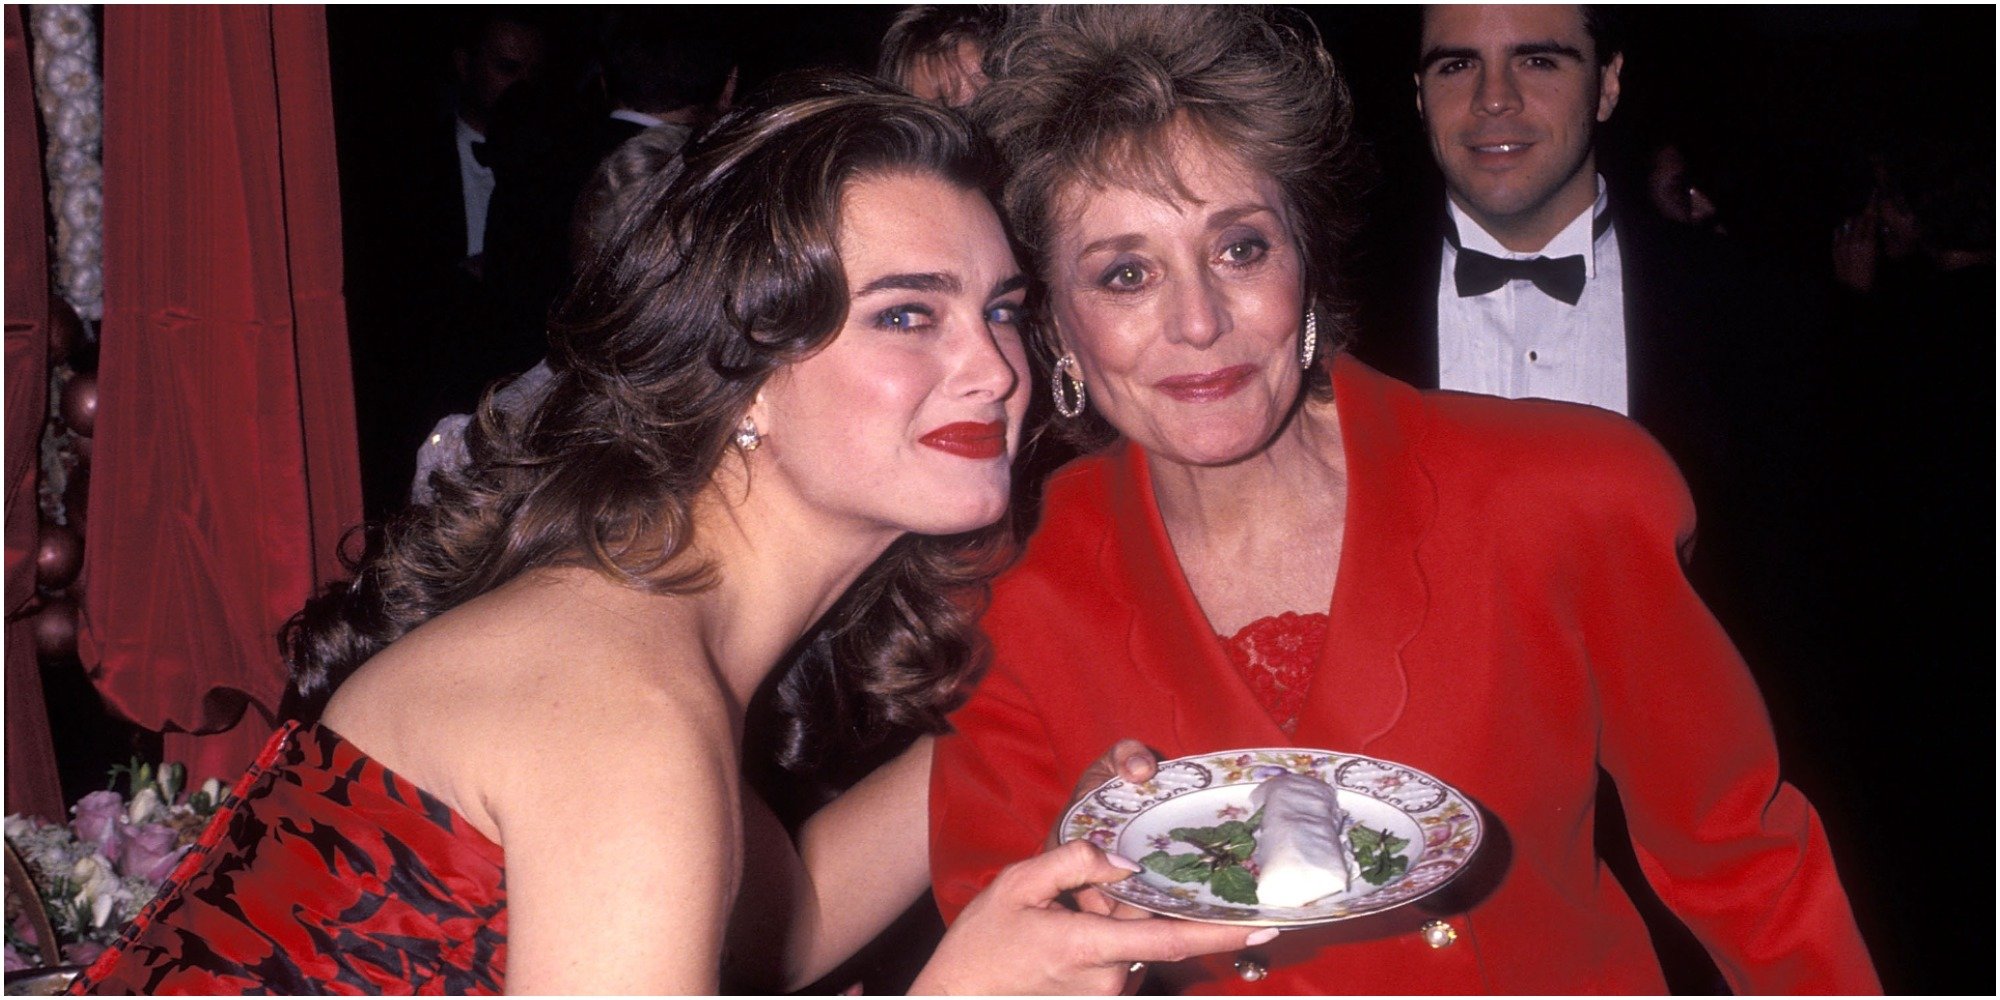 Brooke Shields and Barbara Walters together at an industry event in 1991.